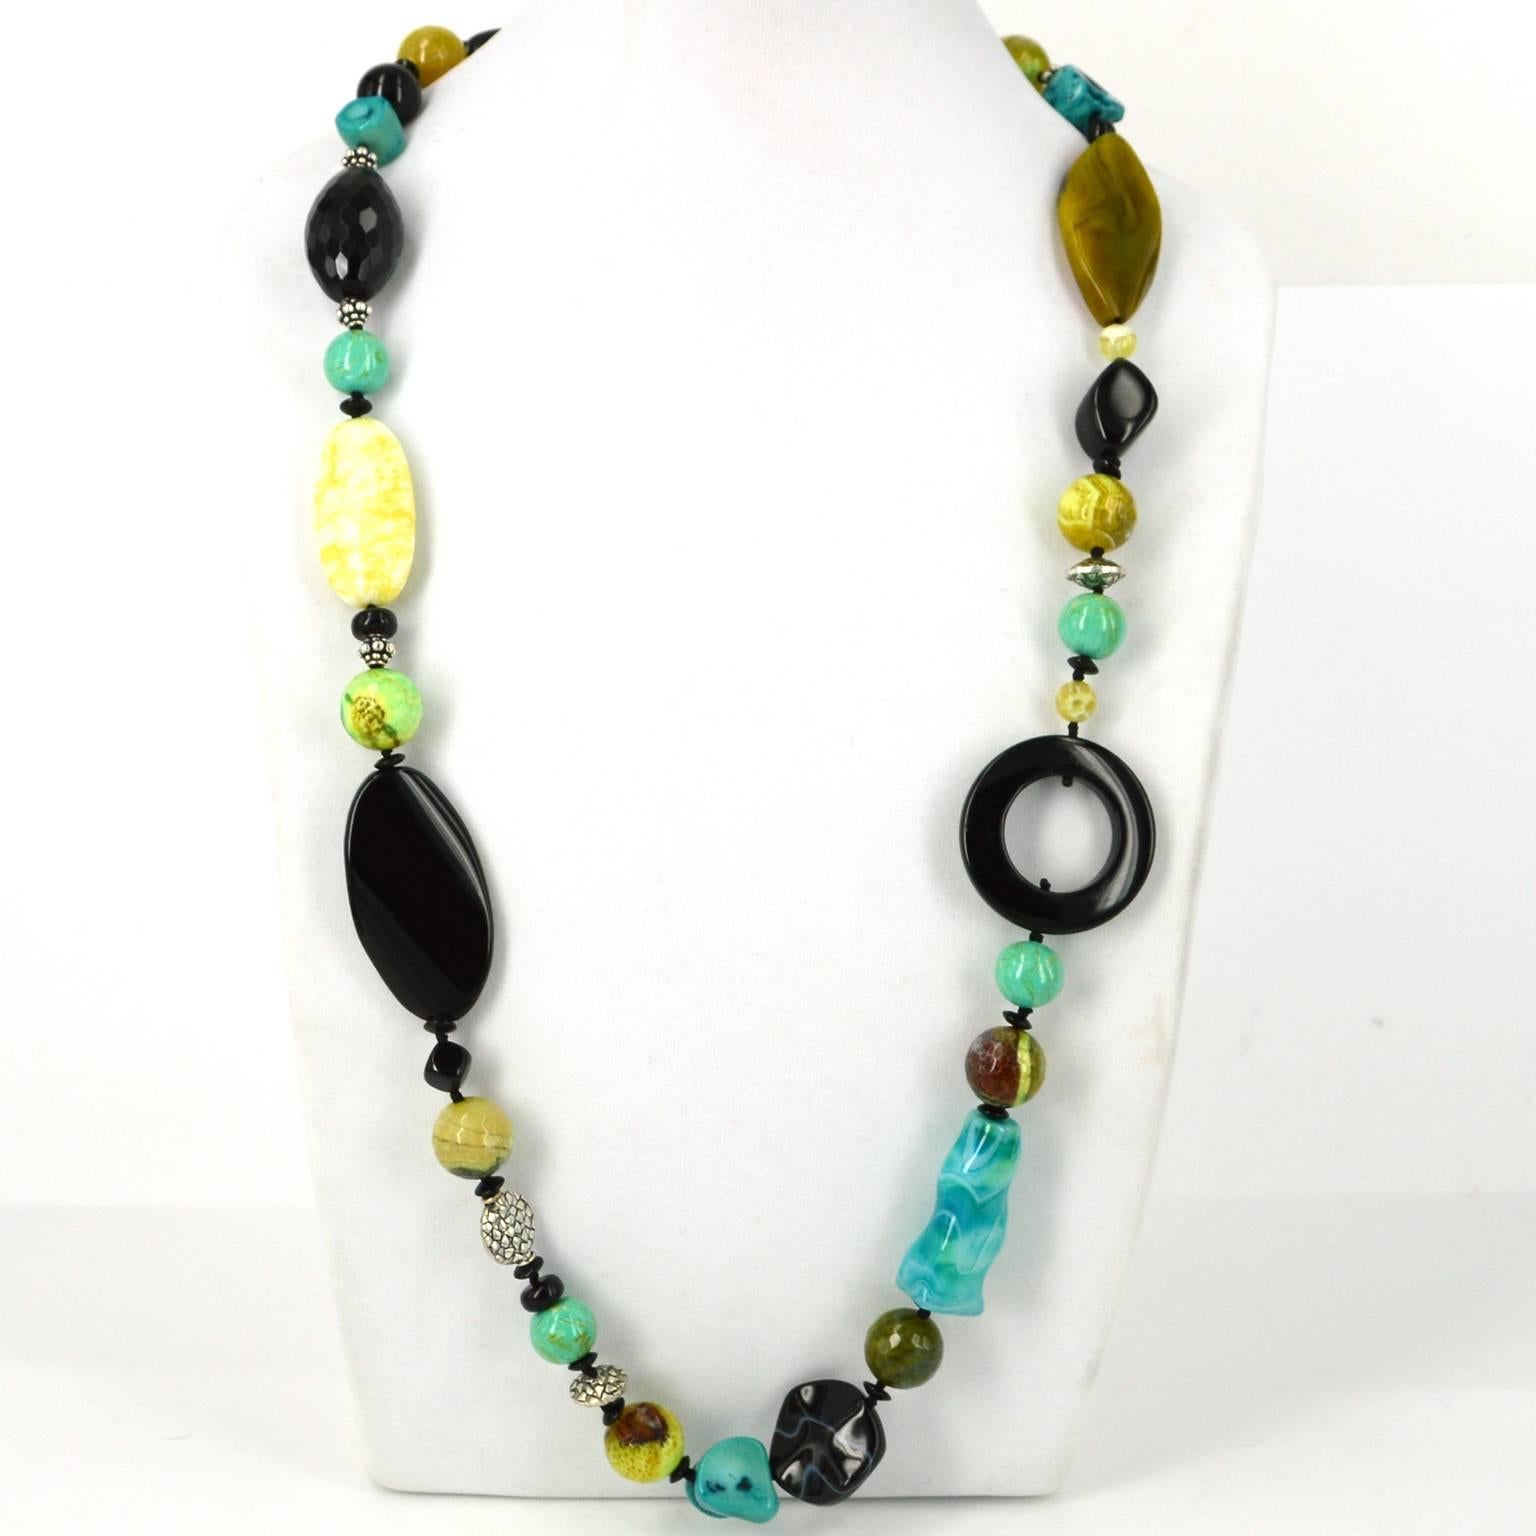 90cm hand knotted on blacl with large accent knots this necklace is a mix of Black agate, Onyx, Lemon Jade, Crackled and Dyed Agate, Sea Bamboo Coral, Round resin beads and Silver plate Copper spacer beads. I love this as it goes with so many other